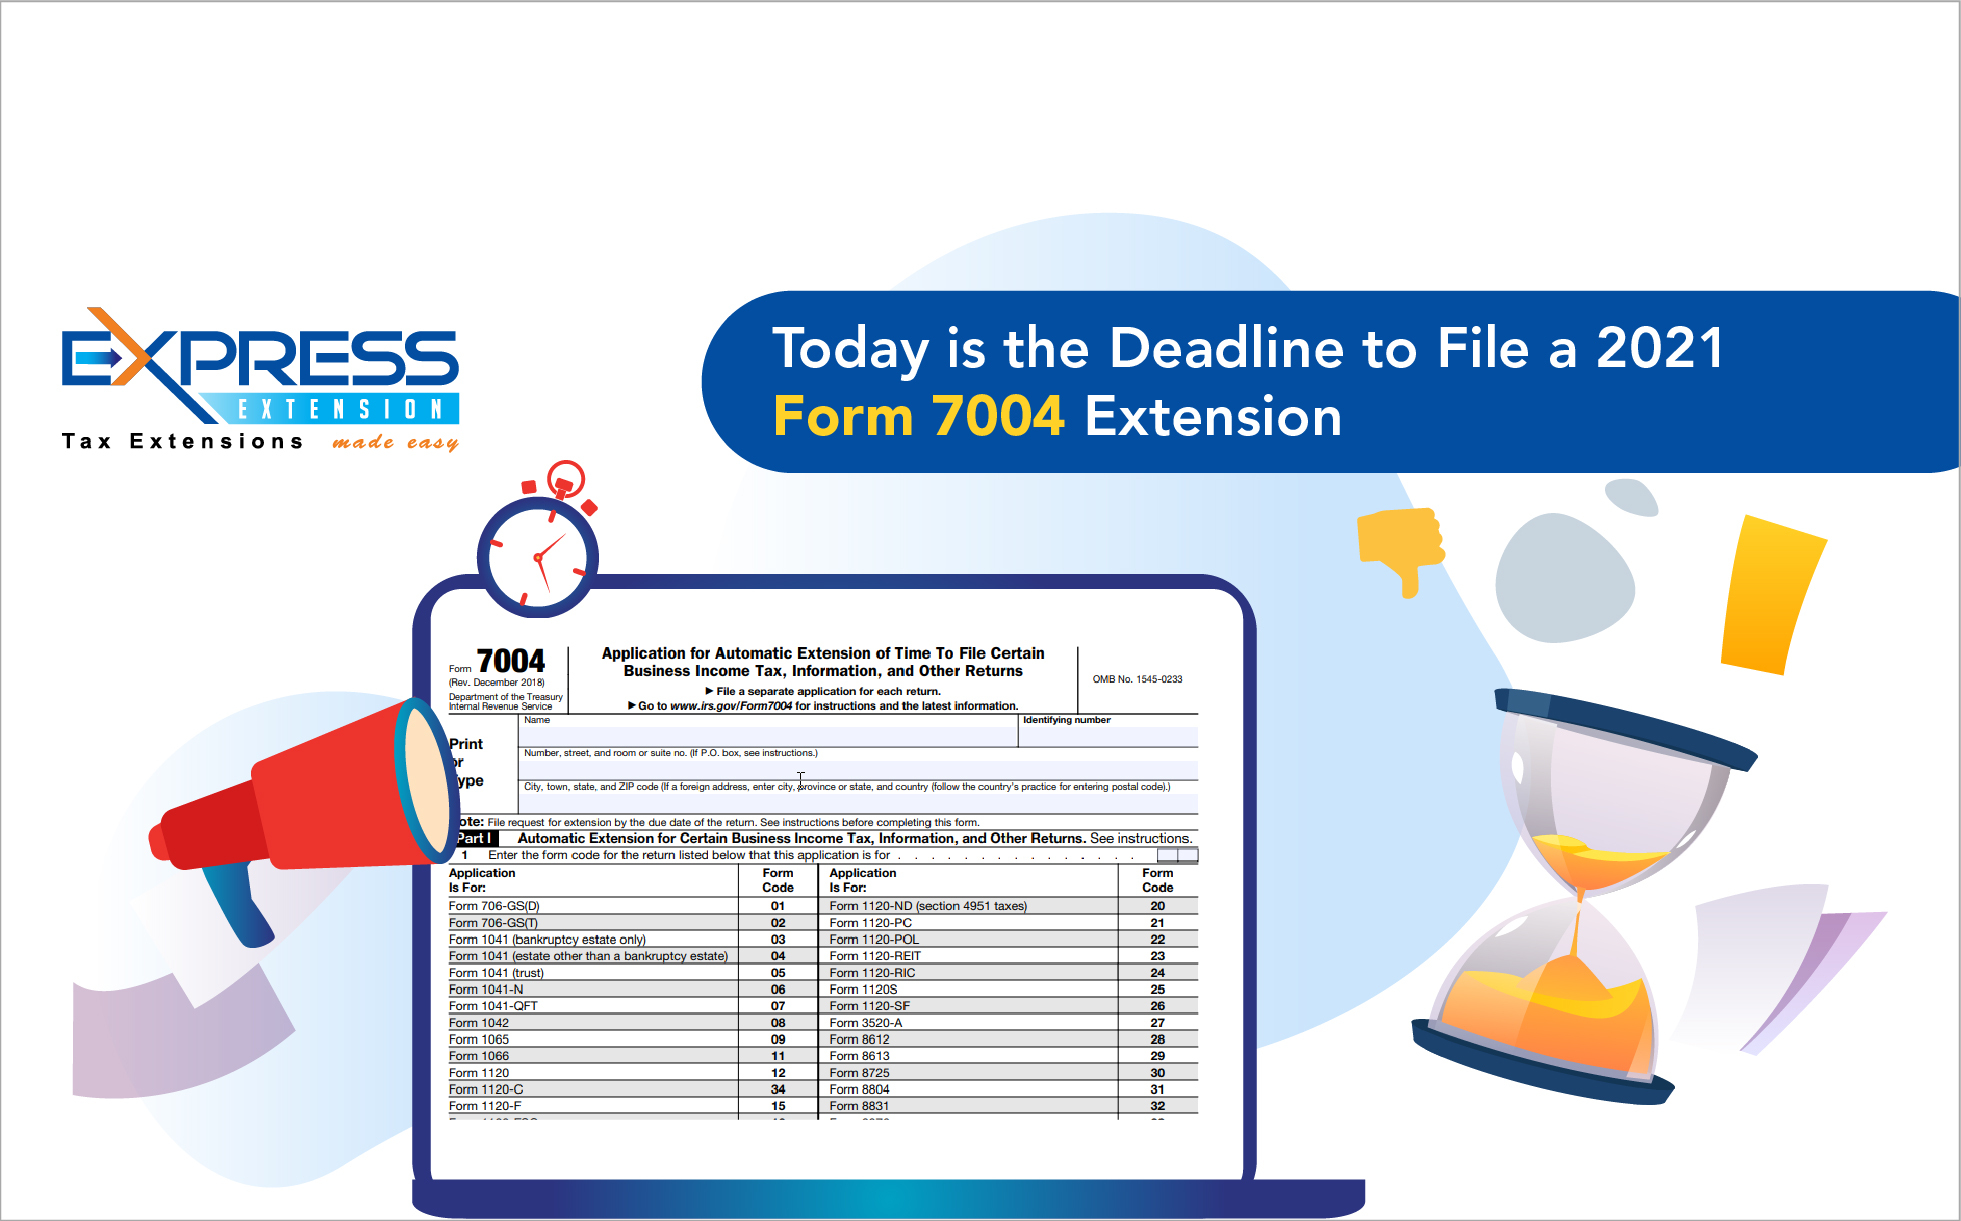 Today is the Deadline to File a 2021 Form 7004 Extension Blog